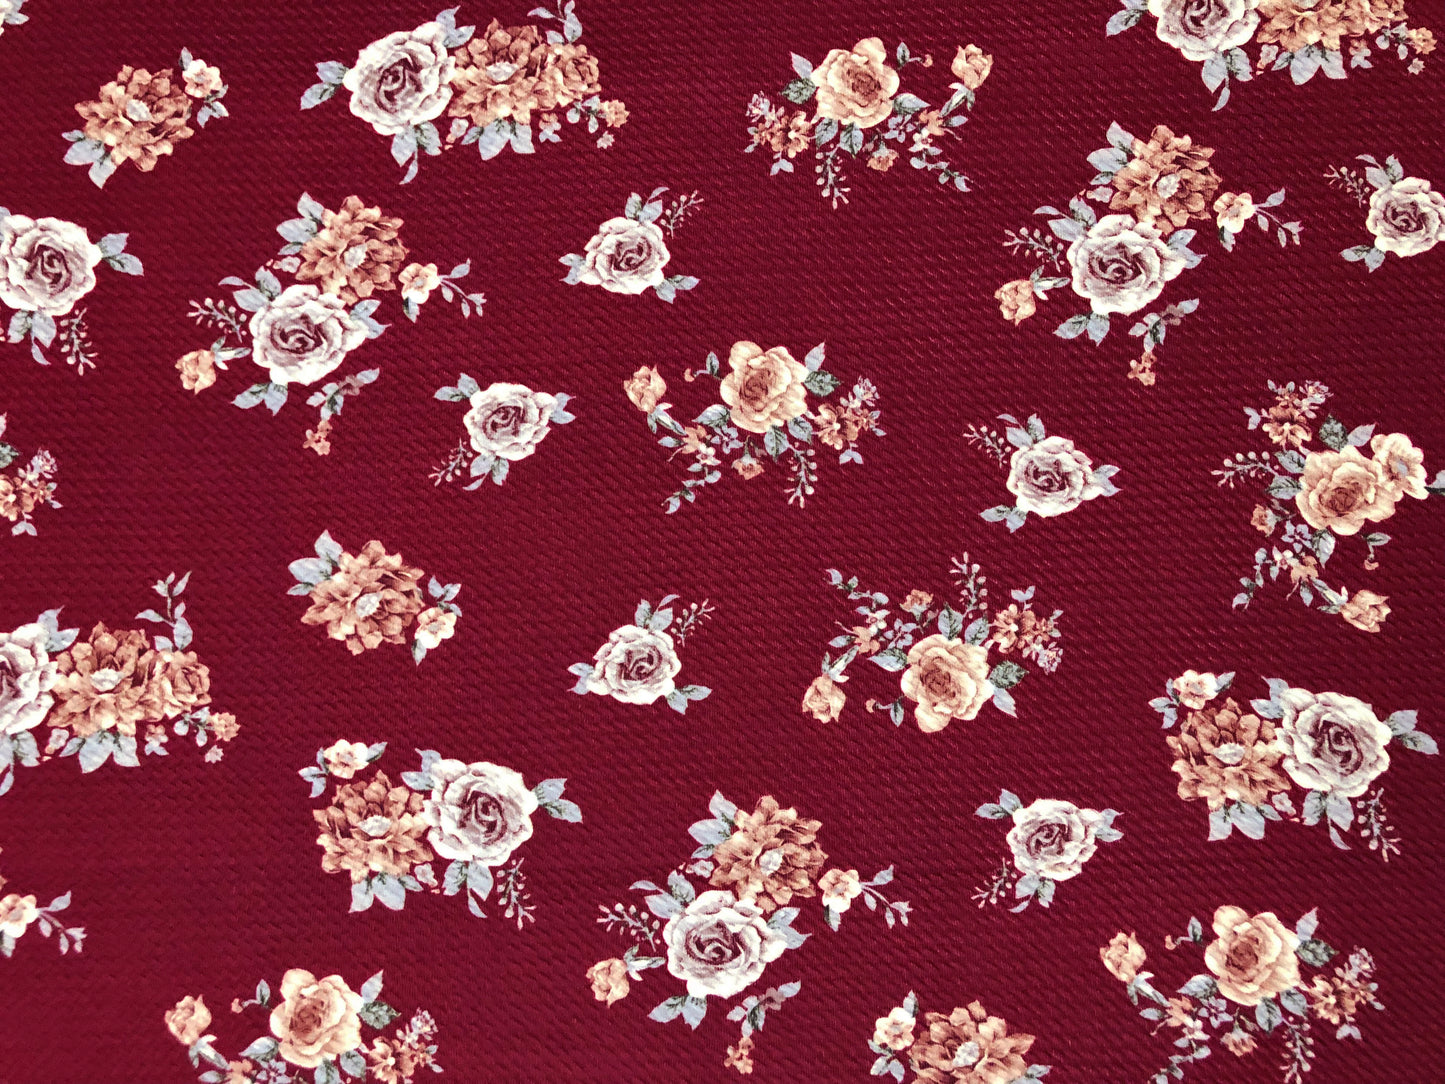 Bullet Knit Printed Fabric-Burgundy White Roses-BPR275-Sold by the Yard